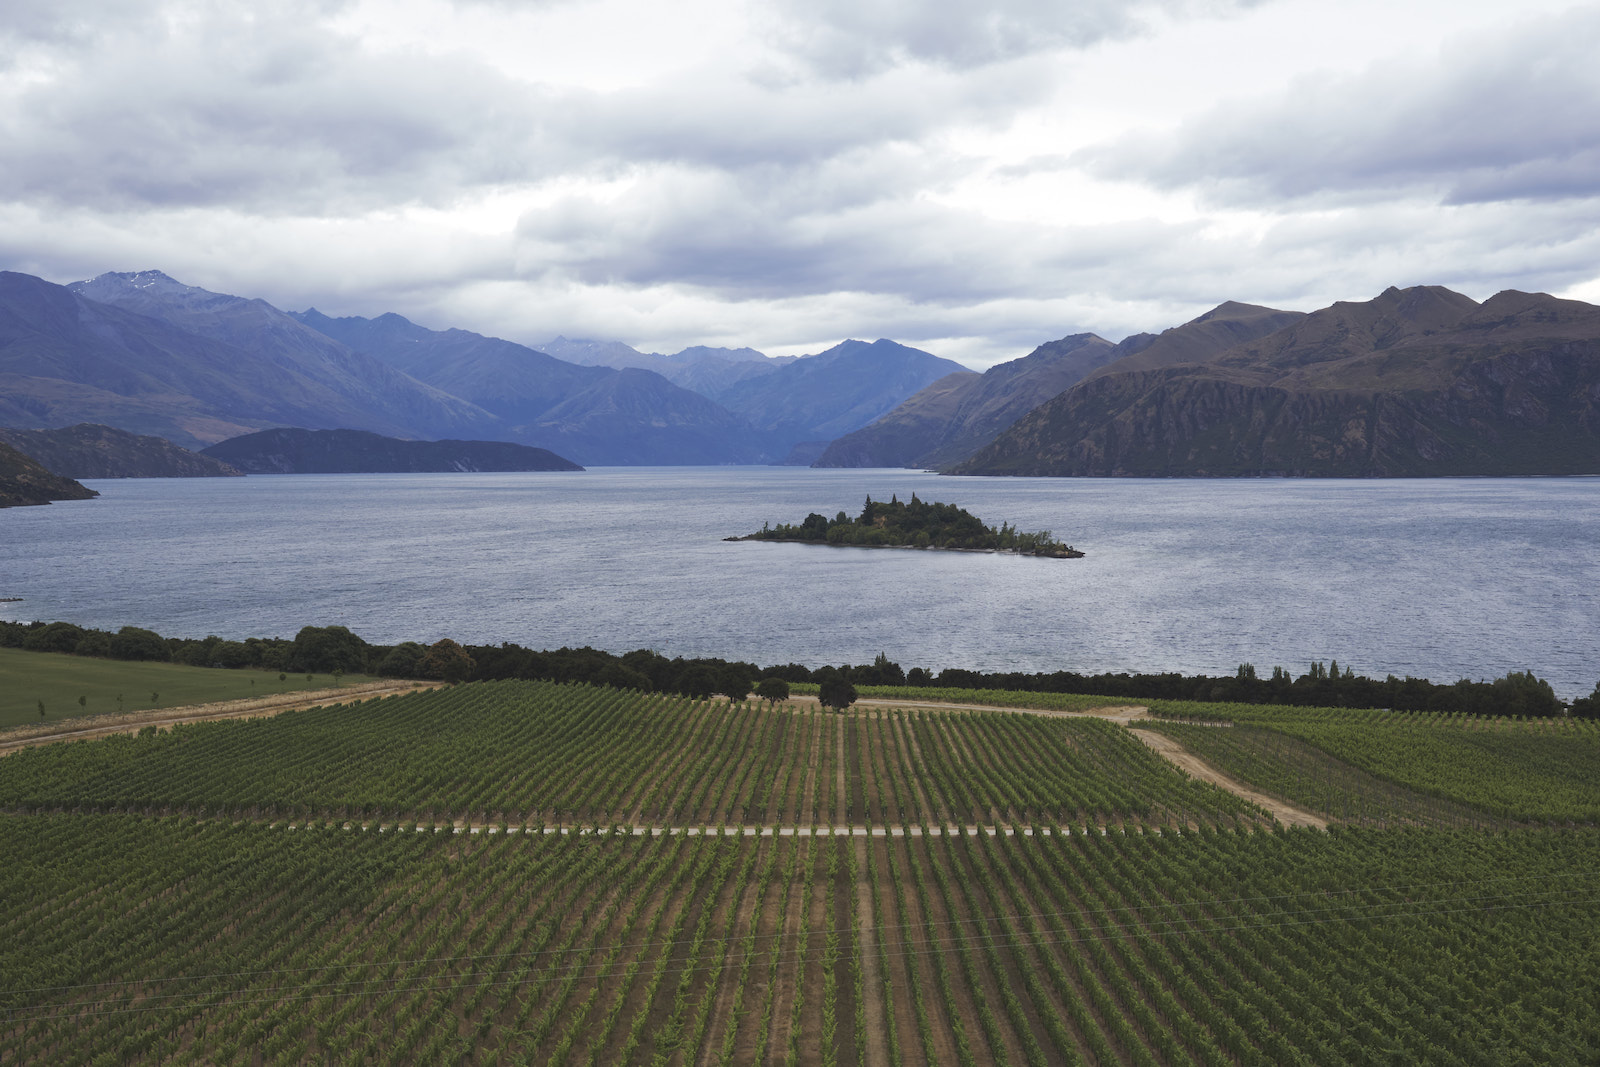 View from Rippon winery over the wines, Lake Wanaka, and mountains